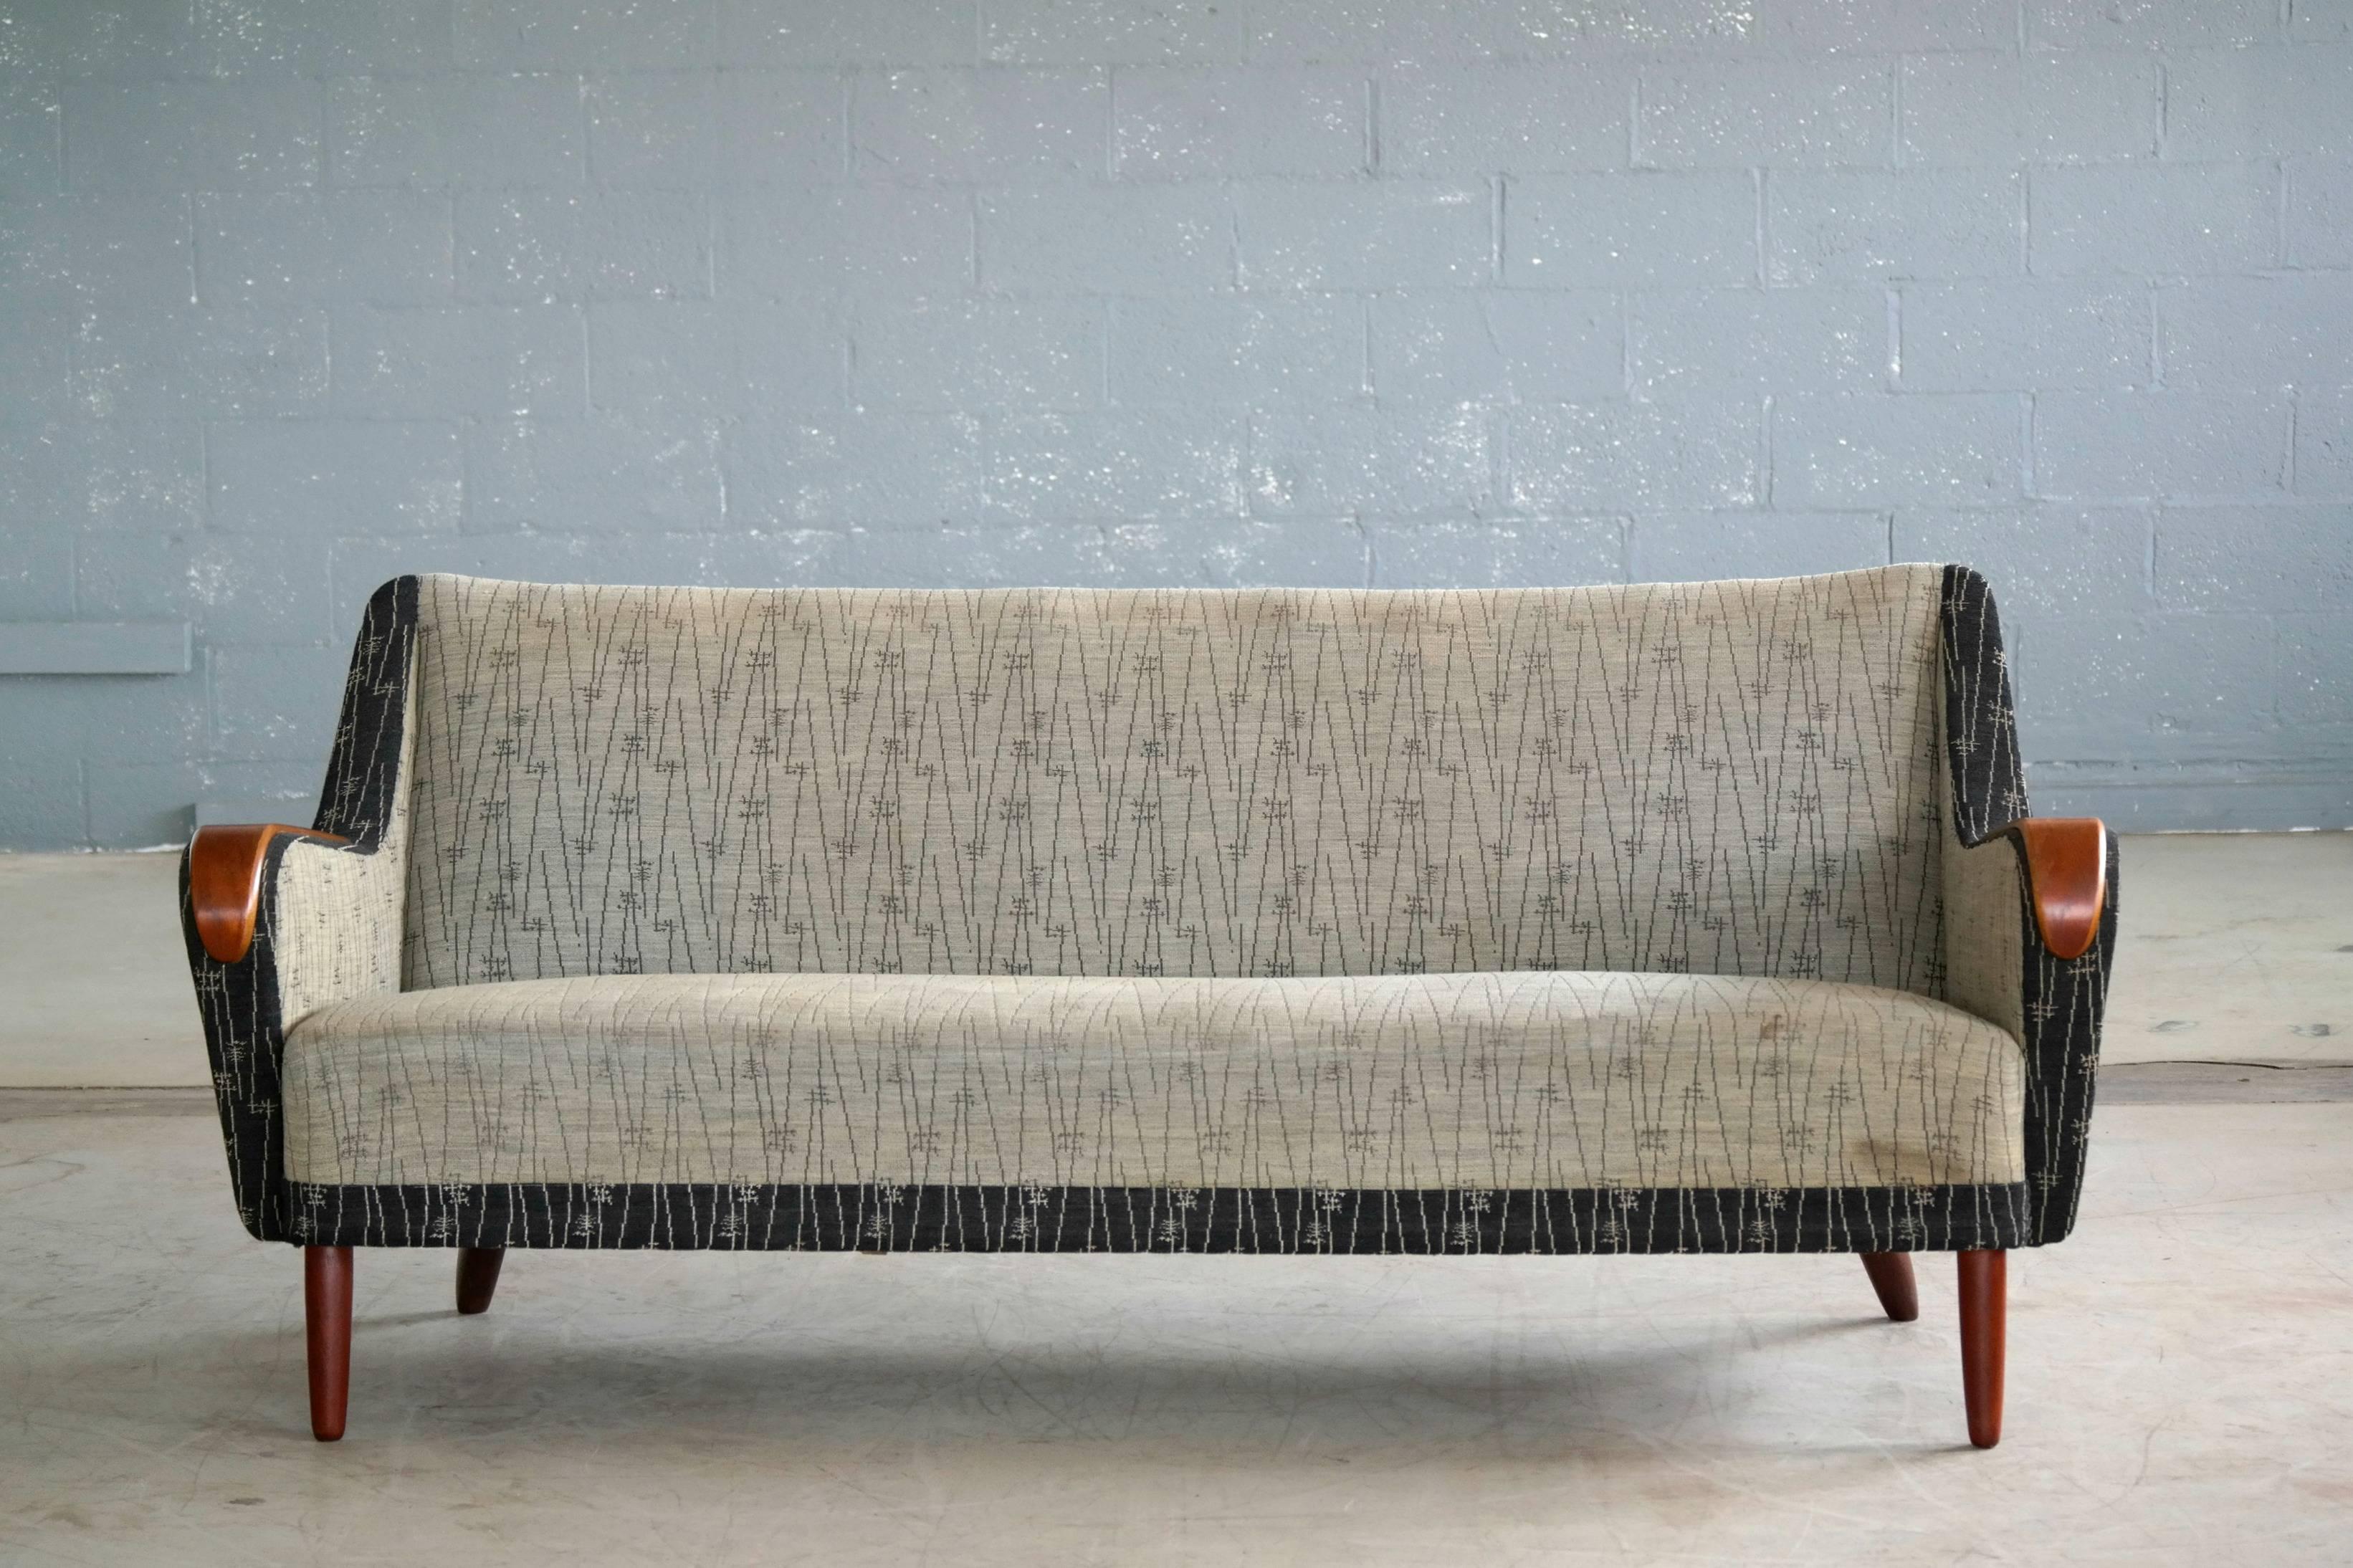 Very Classic and ultra cool Danish three-seat sofa epitomizing the 1950s and reminiscent of Kurt Olsen's design style. Built on a sturdy beech wood frame and raised on solid teak legs with teak accents on the armrests. We love the stance of this